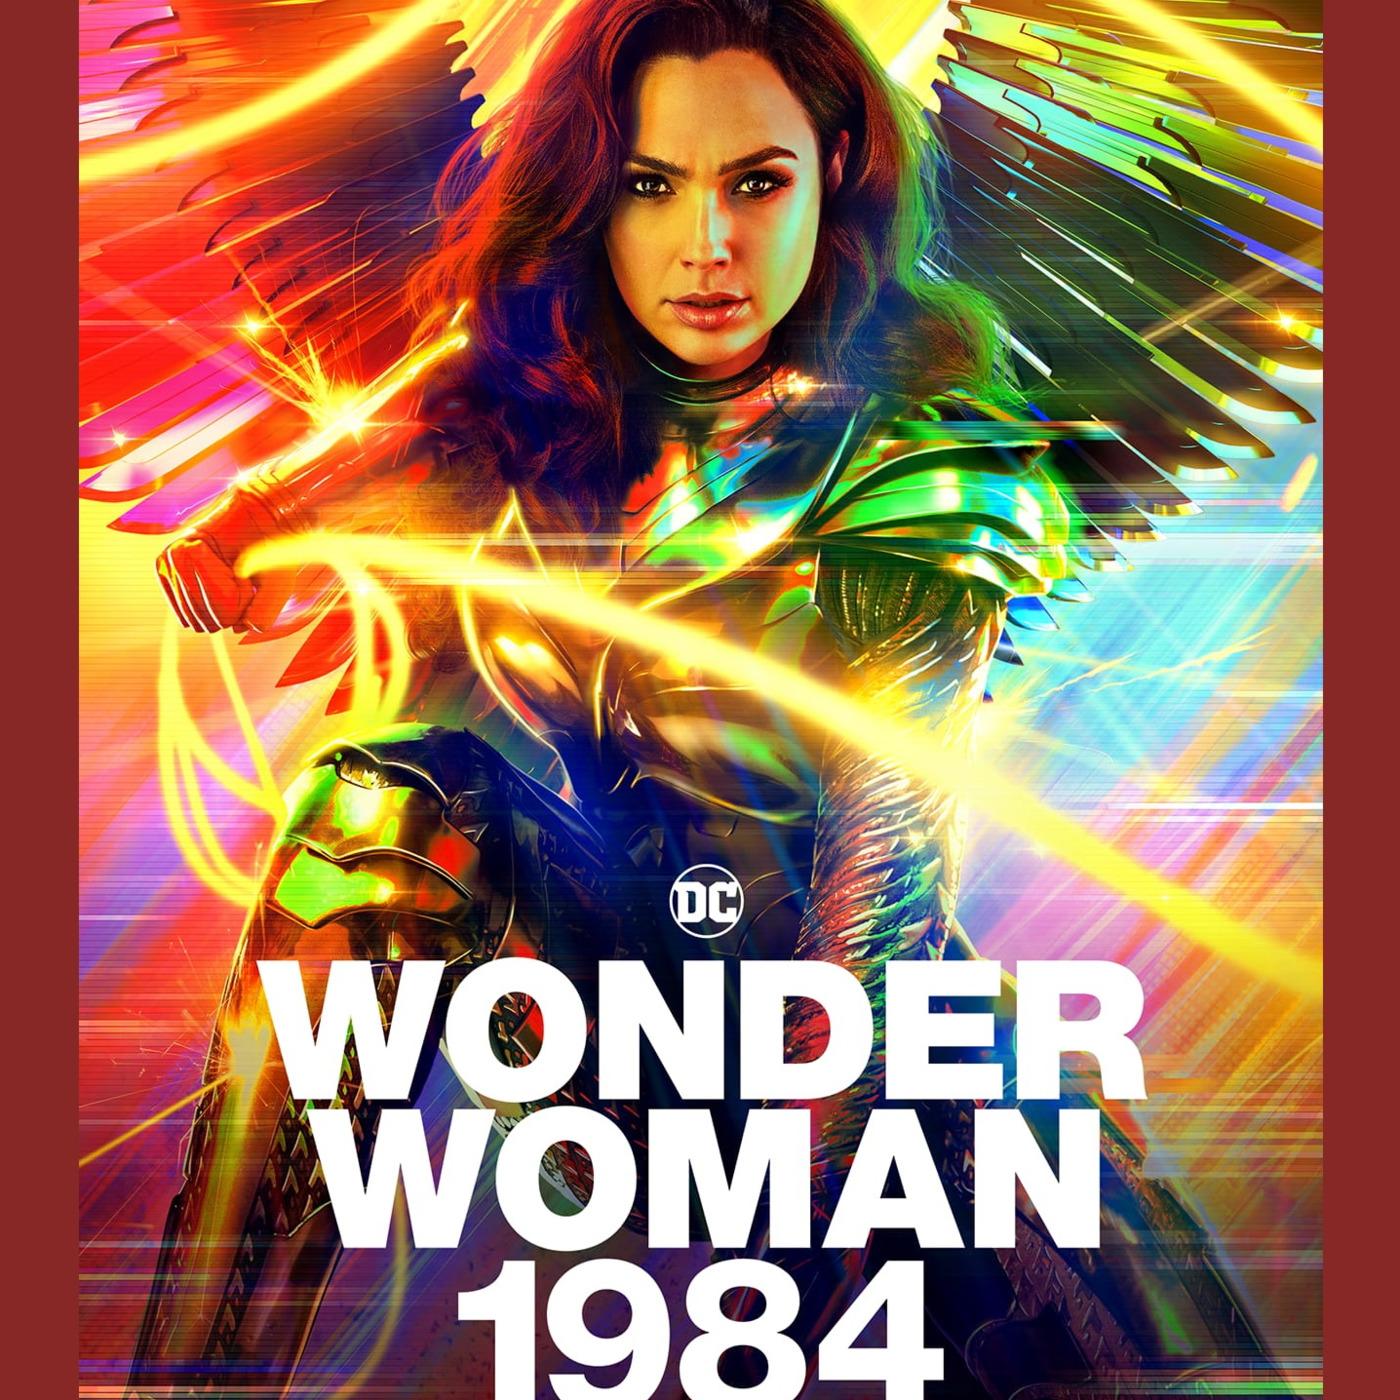 Episode 182: Wonder Woman 1984 audio commentary